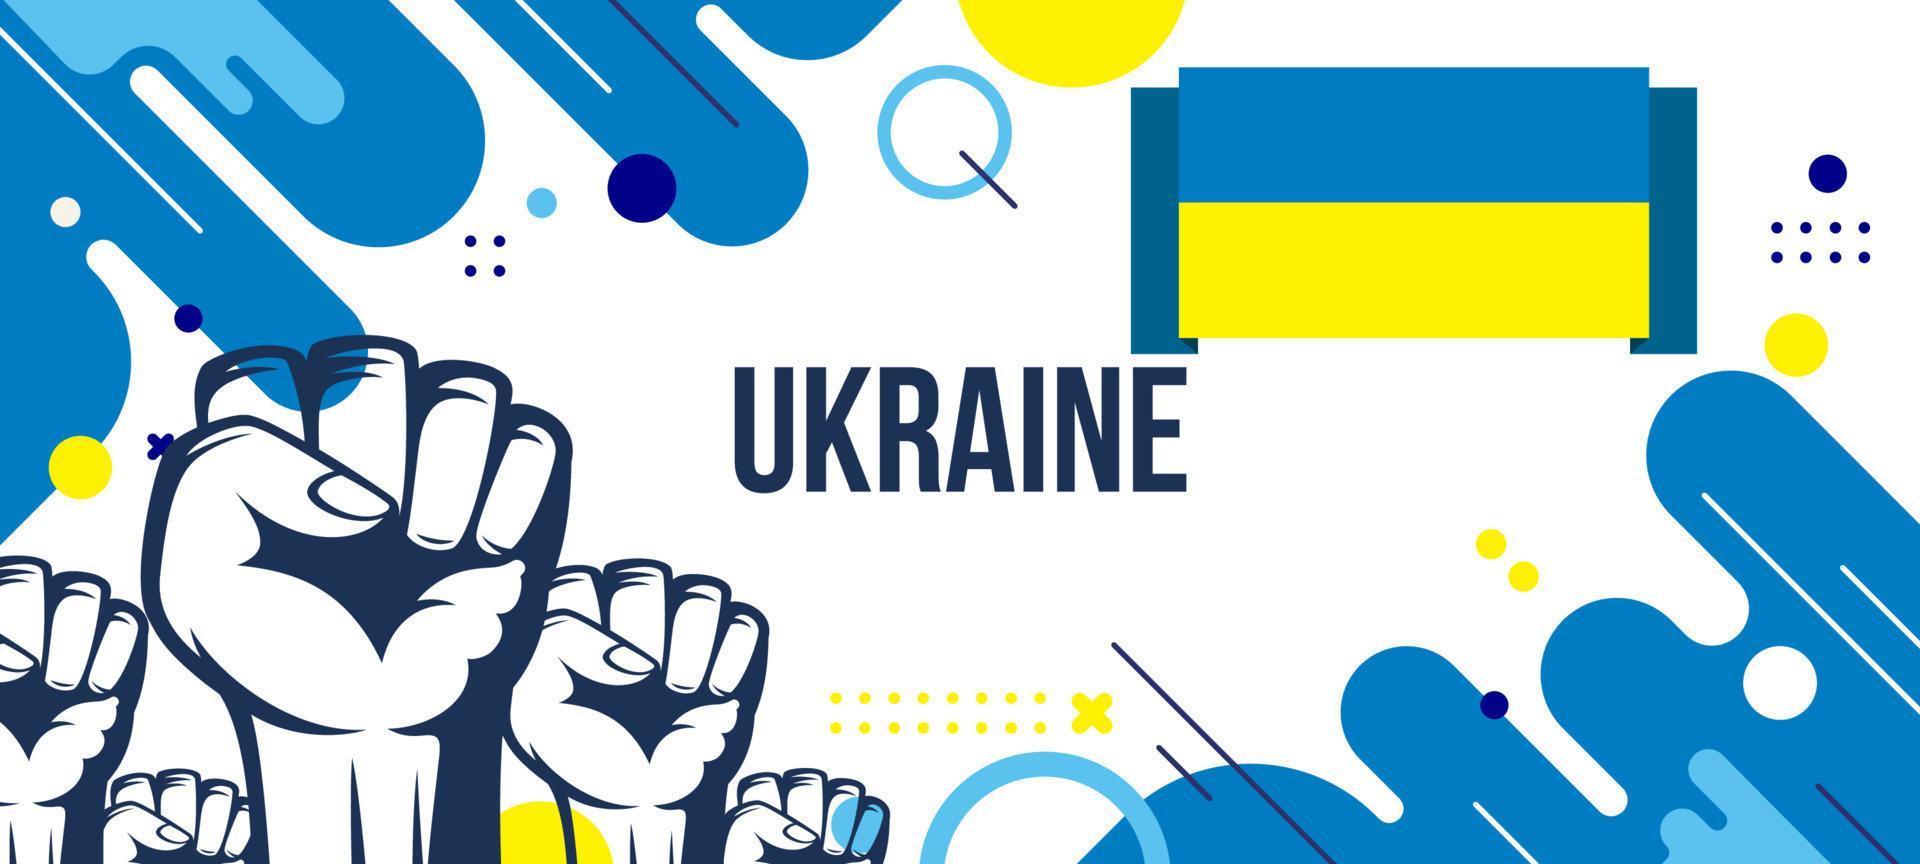 Ukraine national banner with flag, and geometric abstract background design vector